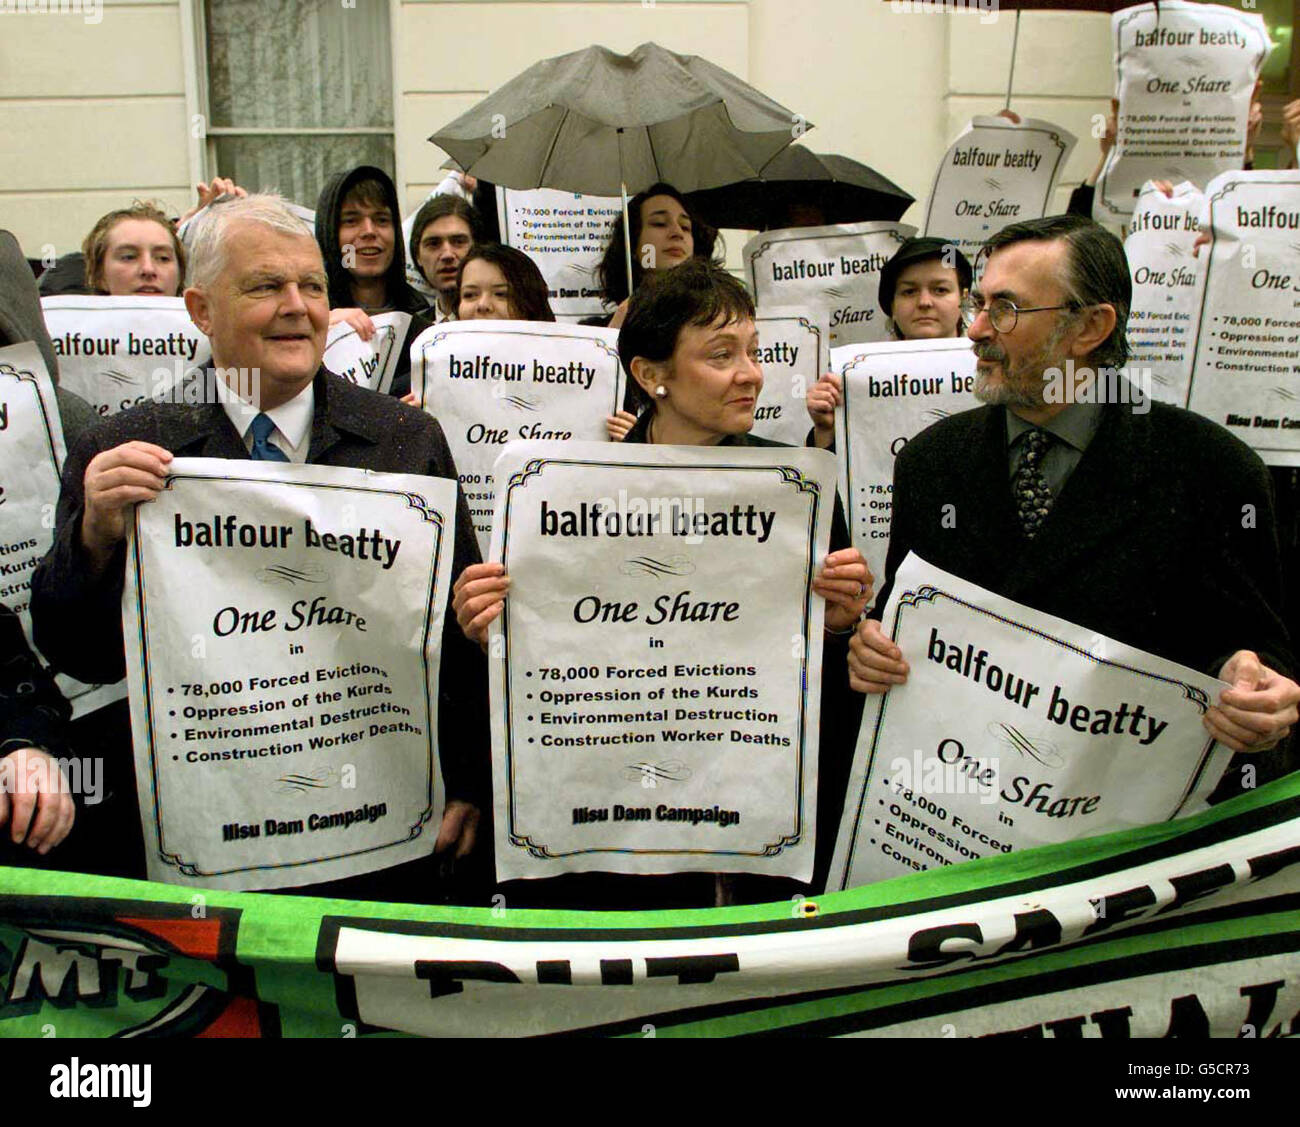 Left to right, Bruce Kent of CND, Liberal Democrat MEP Baroness Sarah Ludford, and John Austin, MP for Erith, at a protest against engineering and construction firm Balfour Beaty - whose annual general meeting was being held today. * The protest took place outside the Royal Lancaster Hotel, Lancaster Gate, London Stock Photo